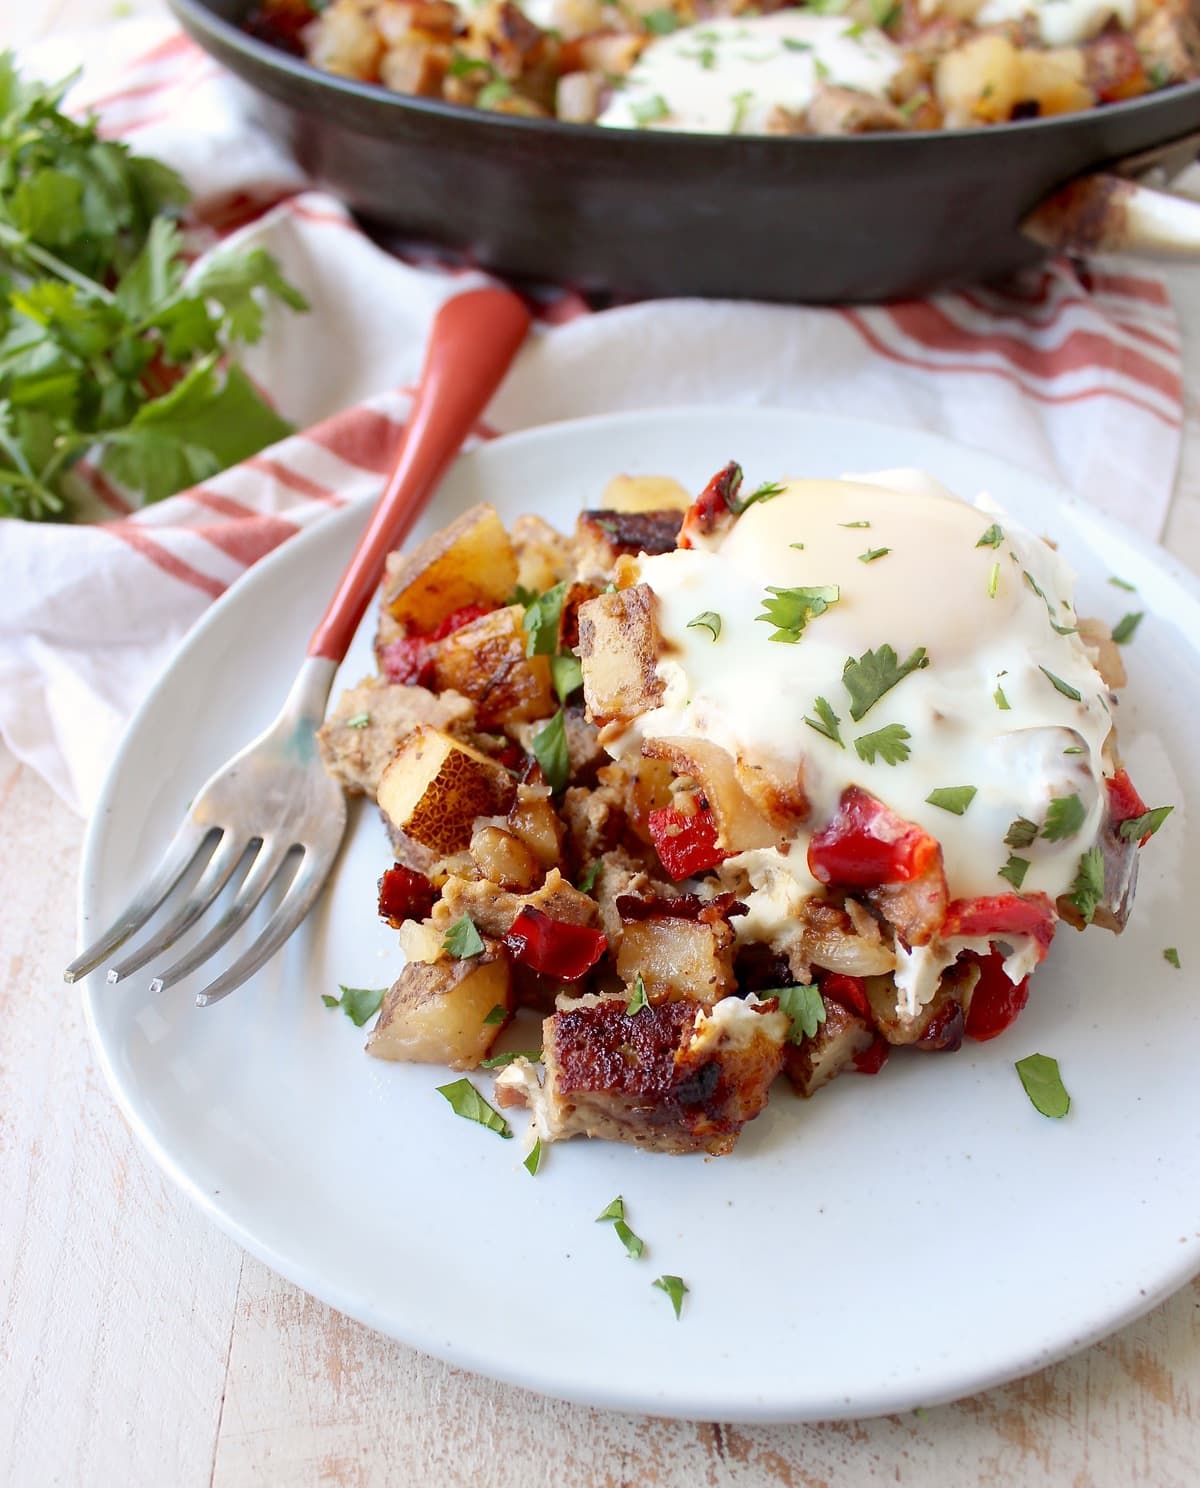 Leftover Bacon Wrapped Meatloaf is transformed into one seriously delicious one pot breakfast in this Meatloaf Hash Recipe with potatoes, onions & eggs!